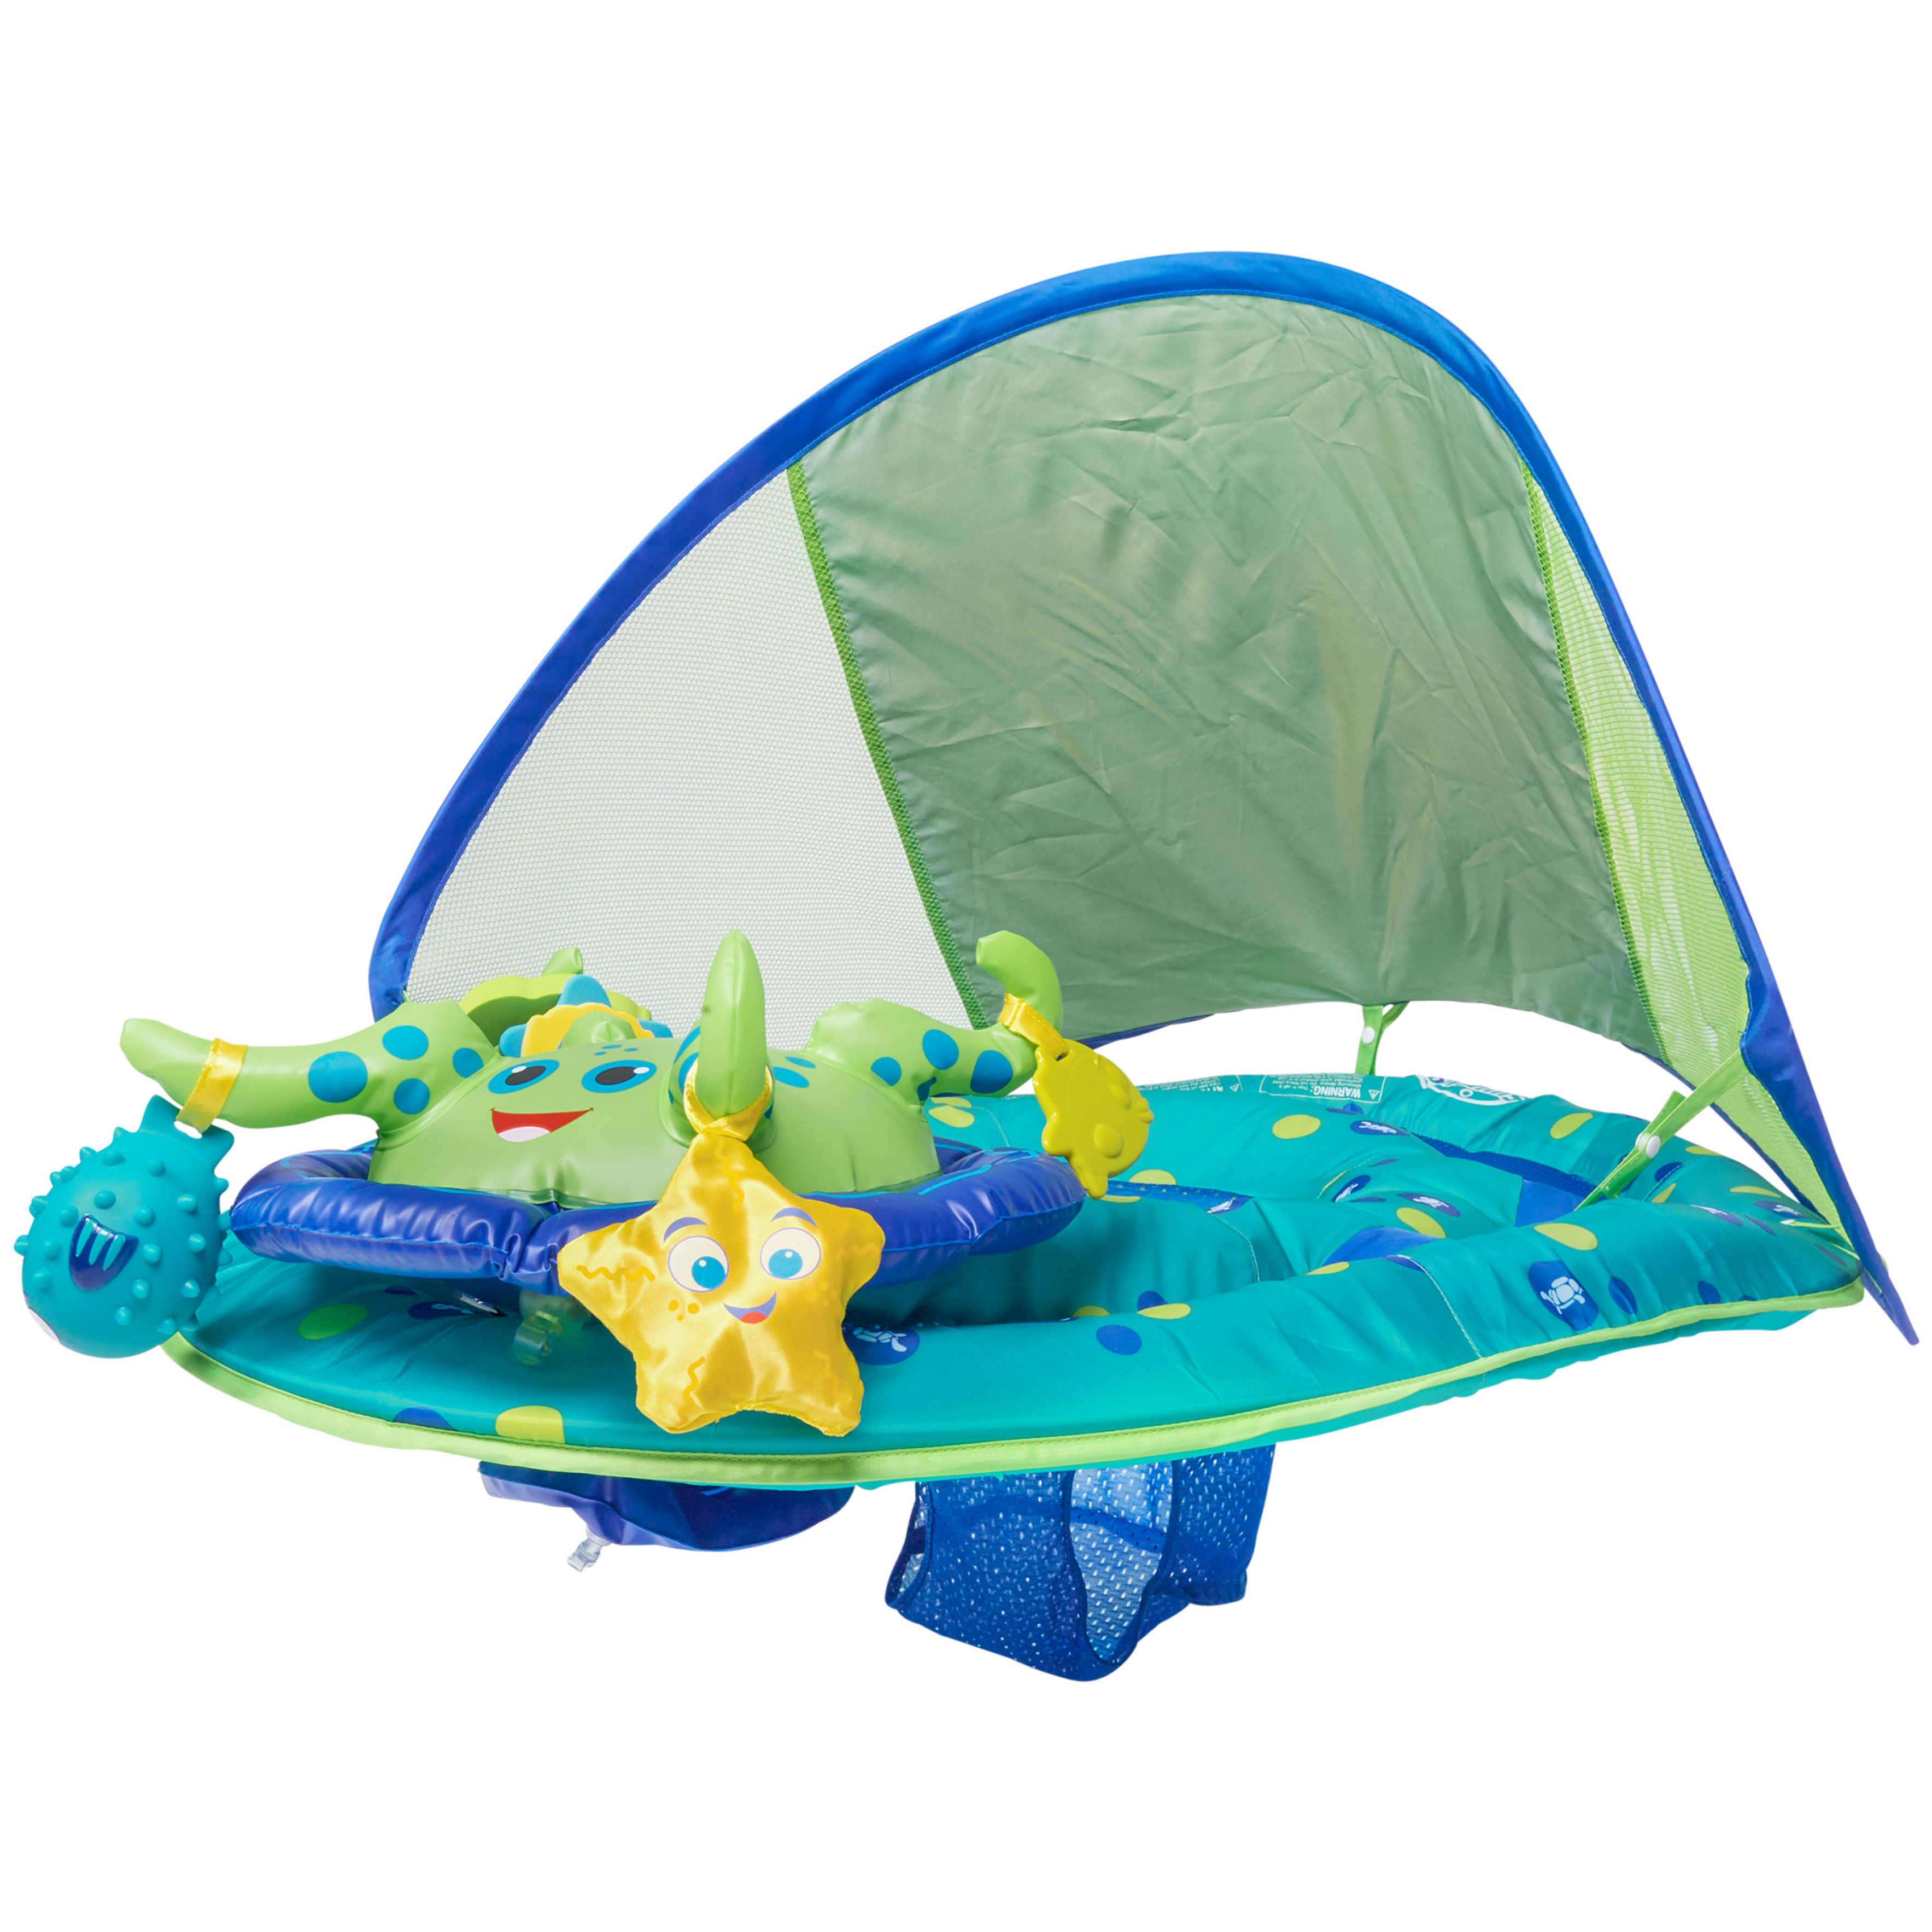 SwimWays Baby Spring Float Activity Center, Inflatable Float for Baby Boys, Blue/Green - image 8 of 8